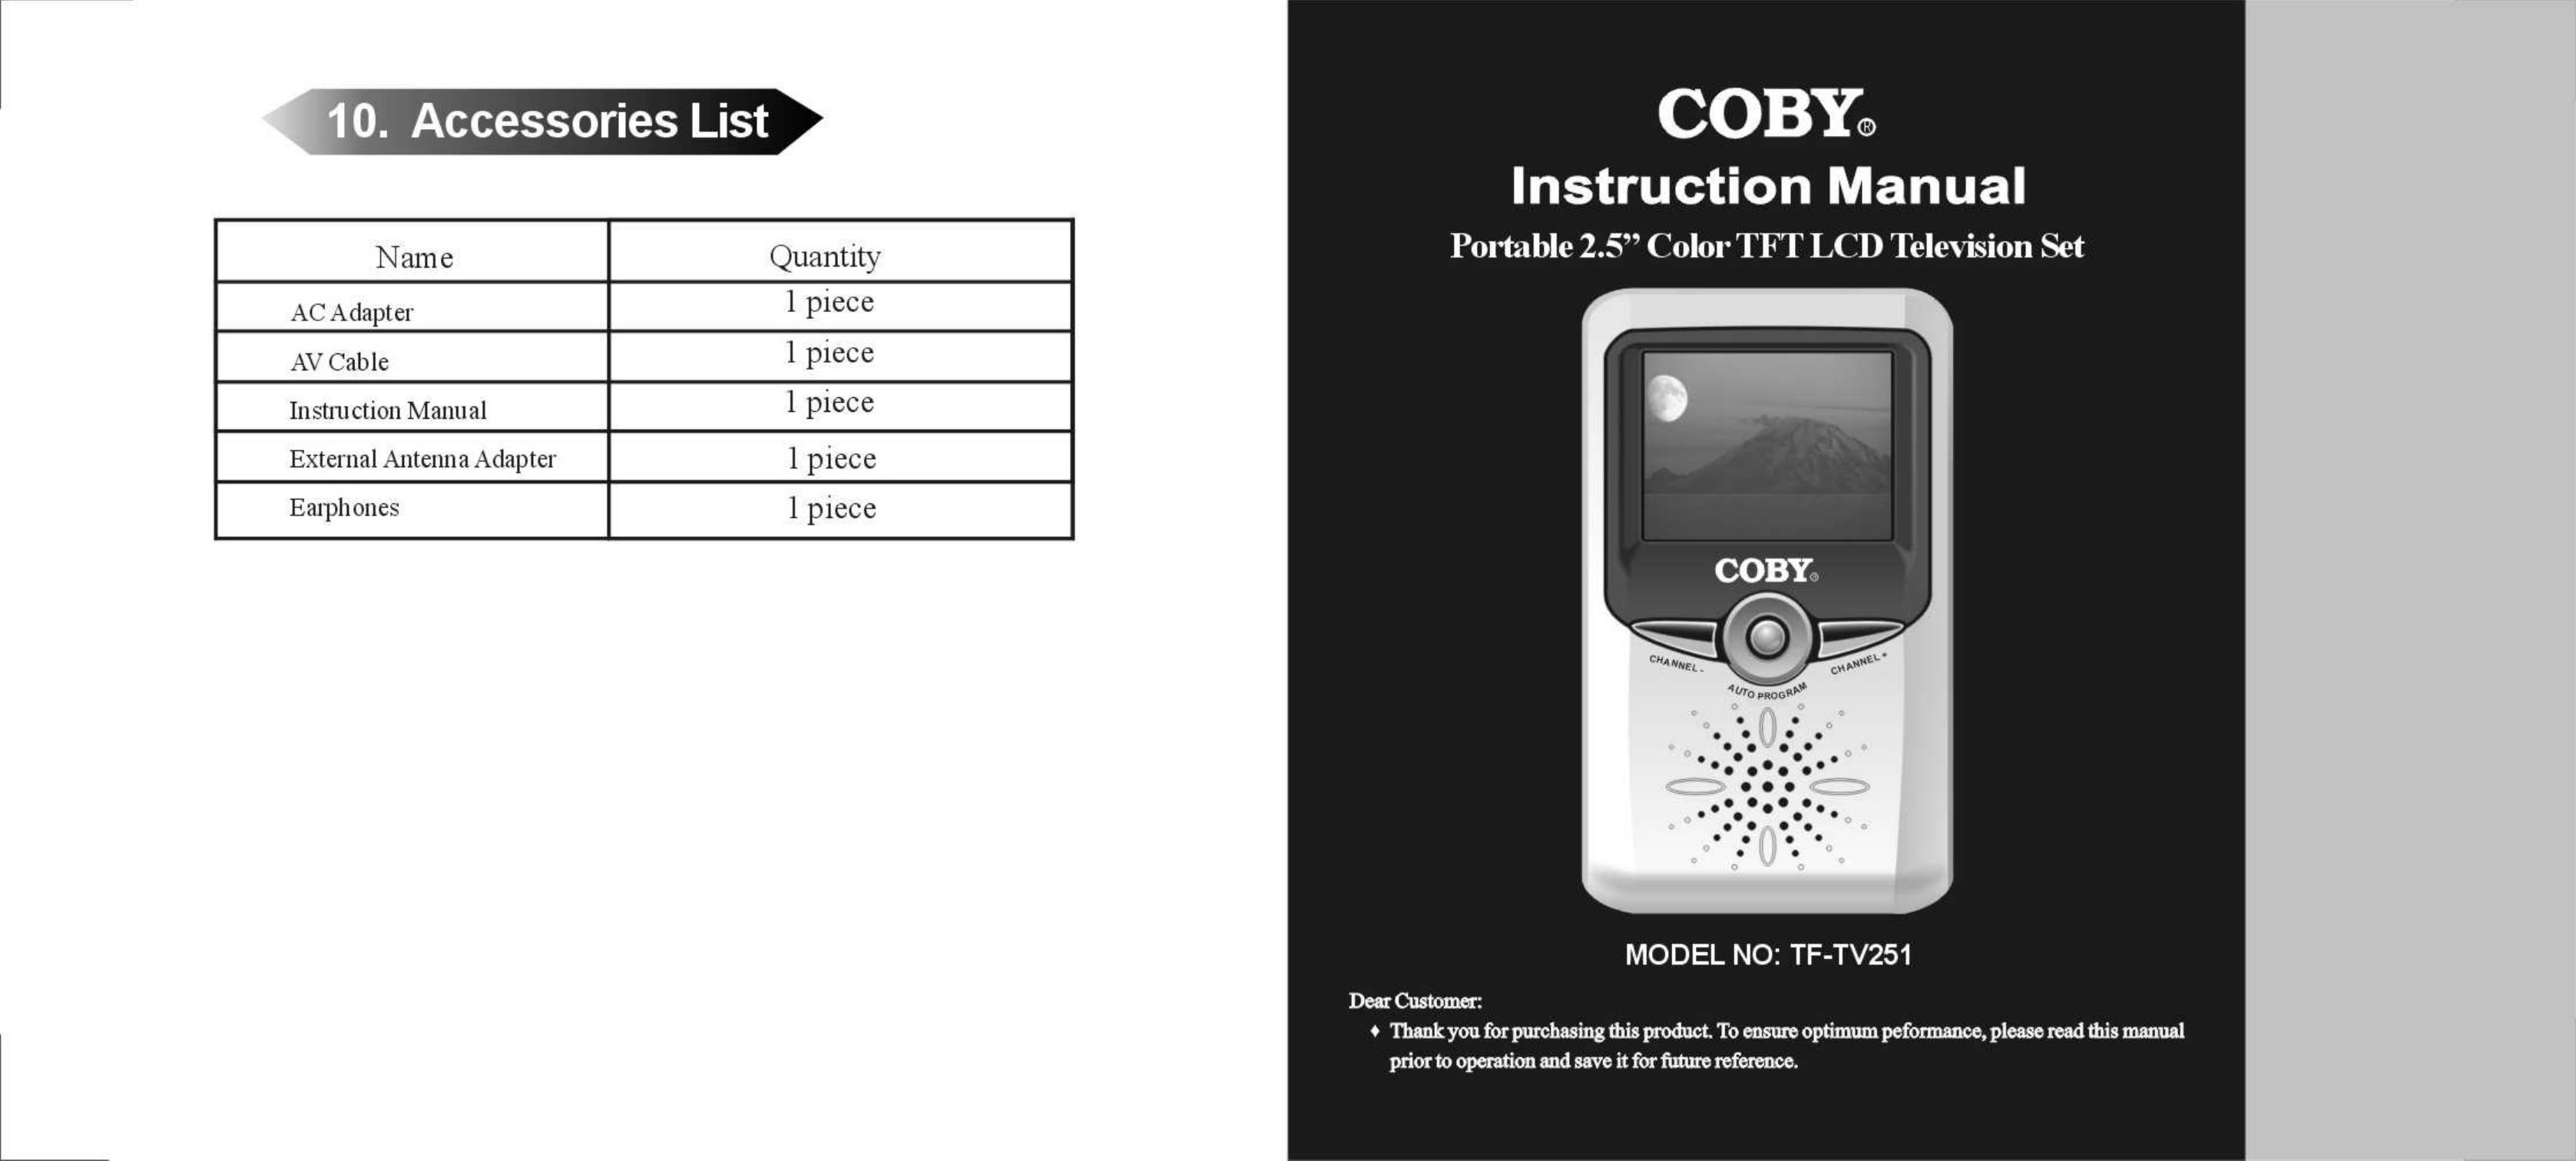 COBY electronic TF-TV251 Handheld TV User Manual (Page 1)